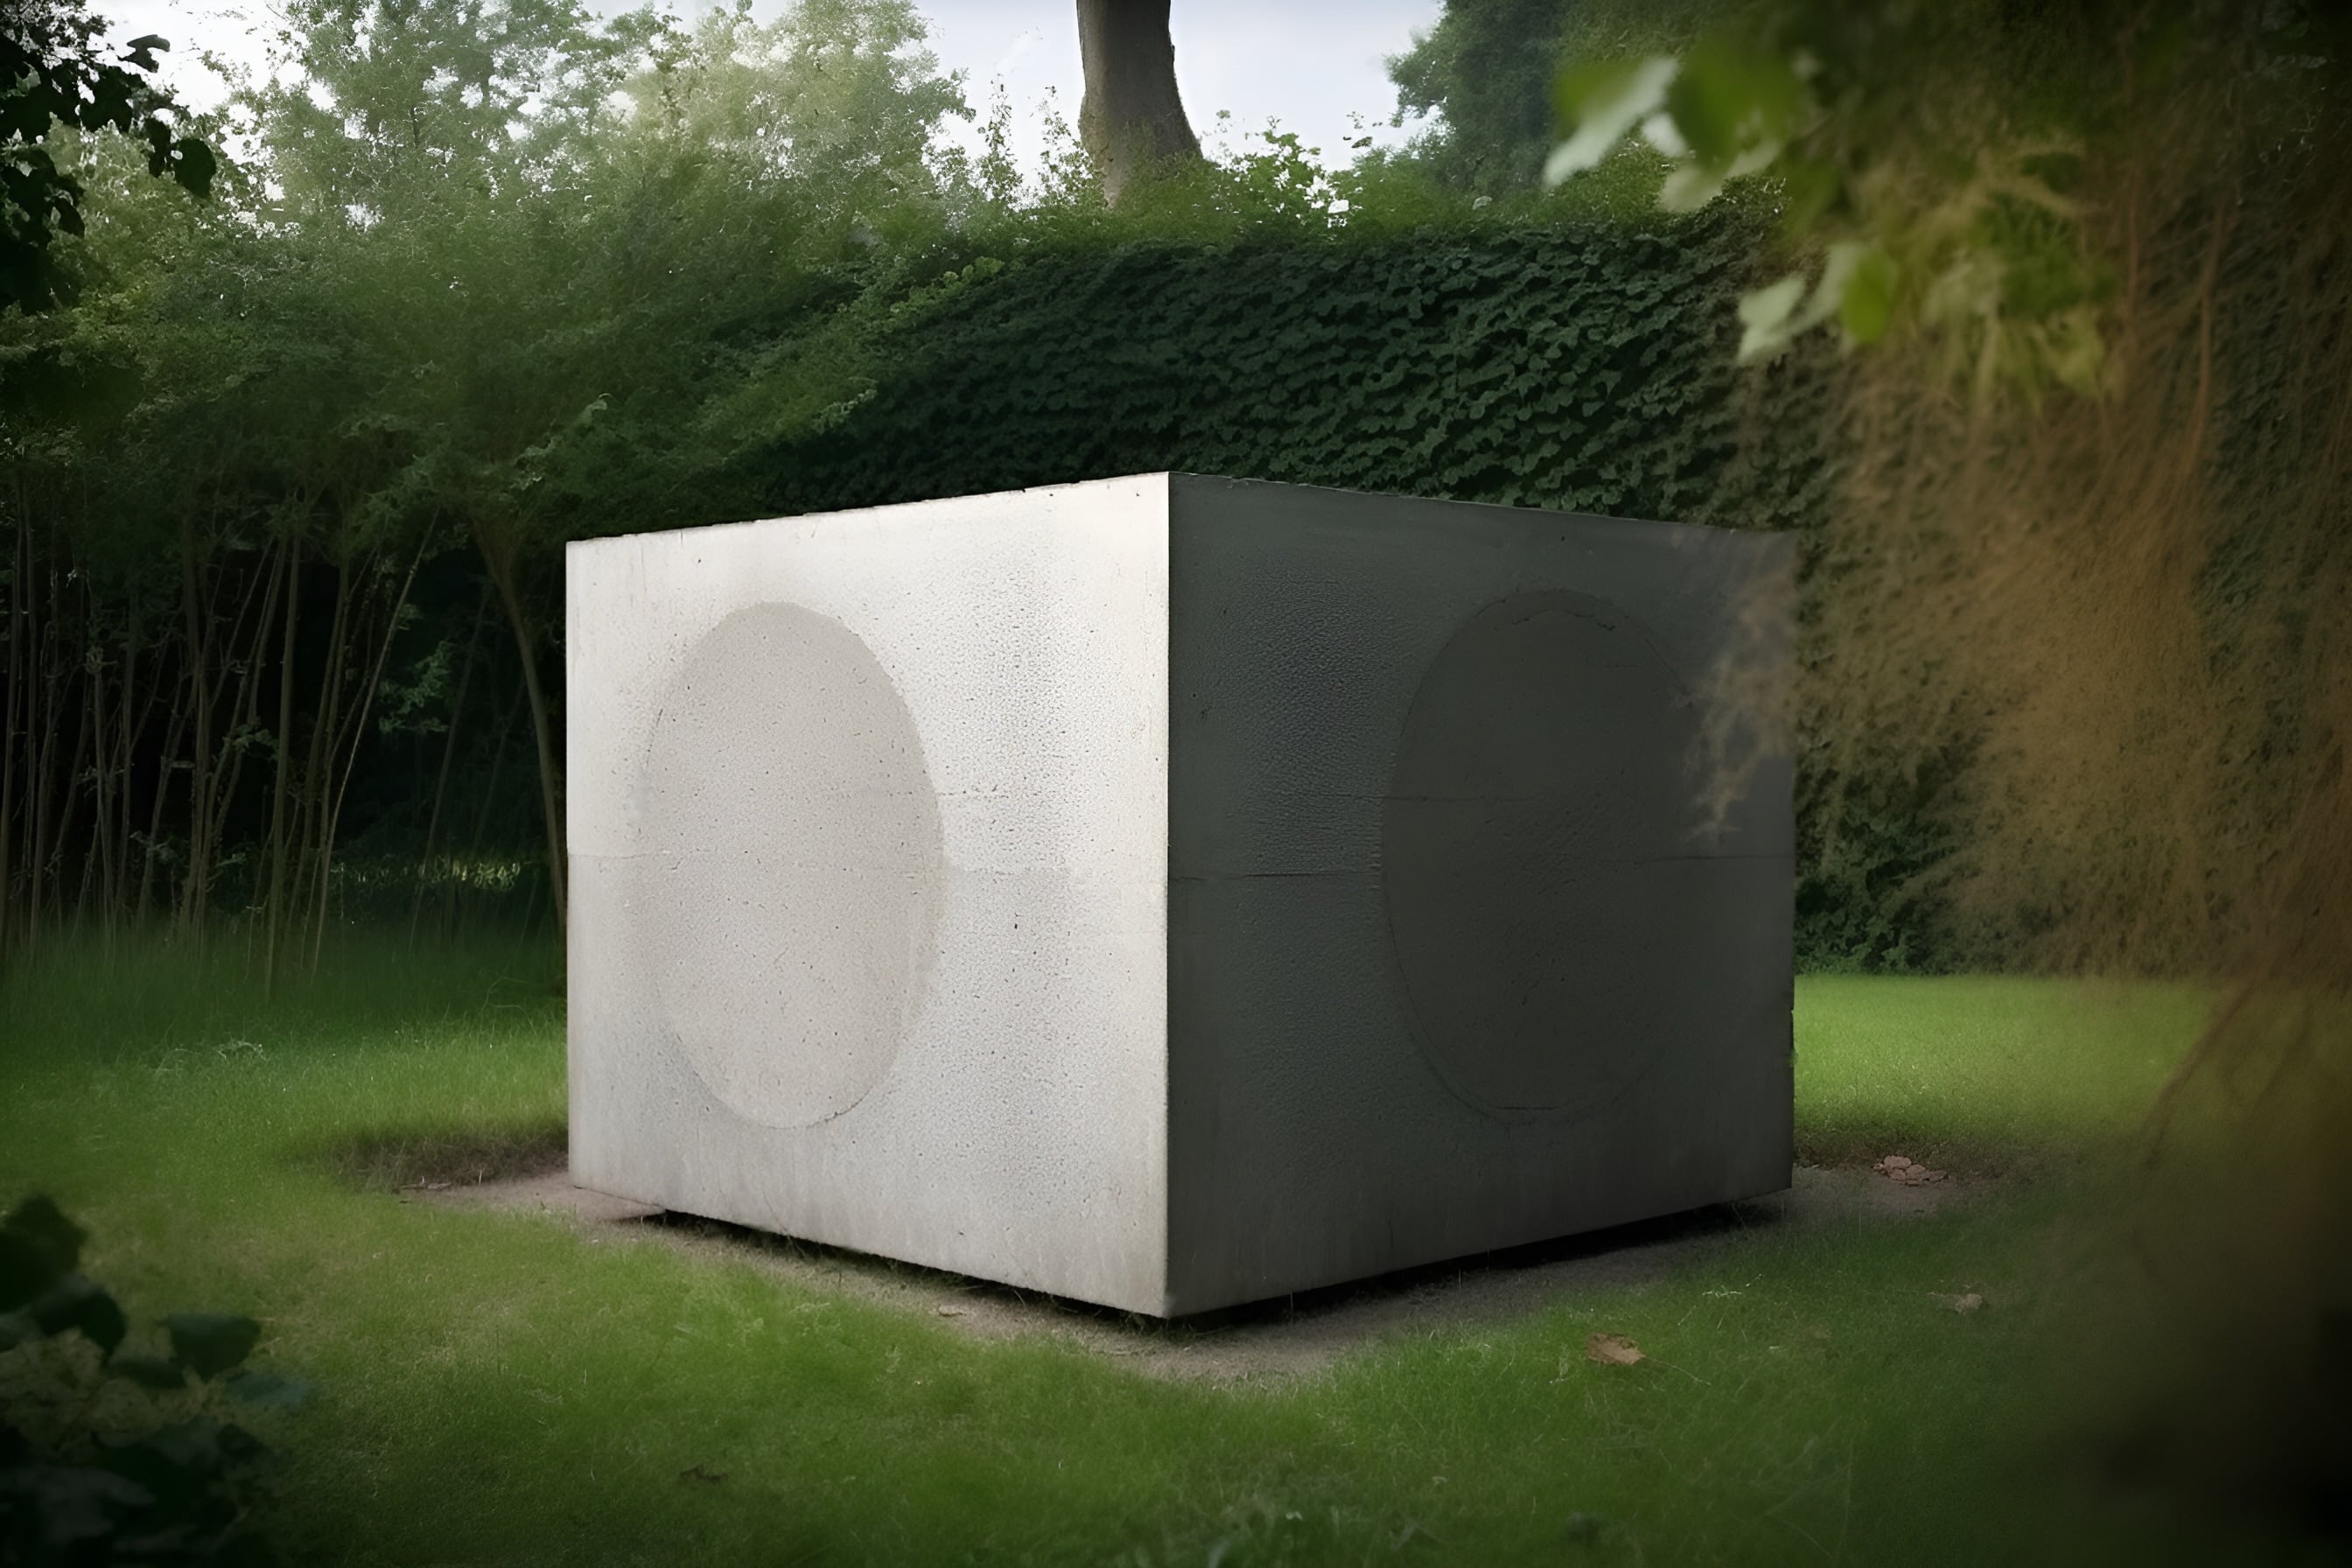 How much does a cube of concrete weigh?